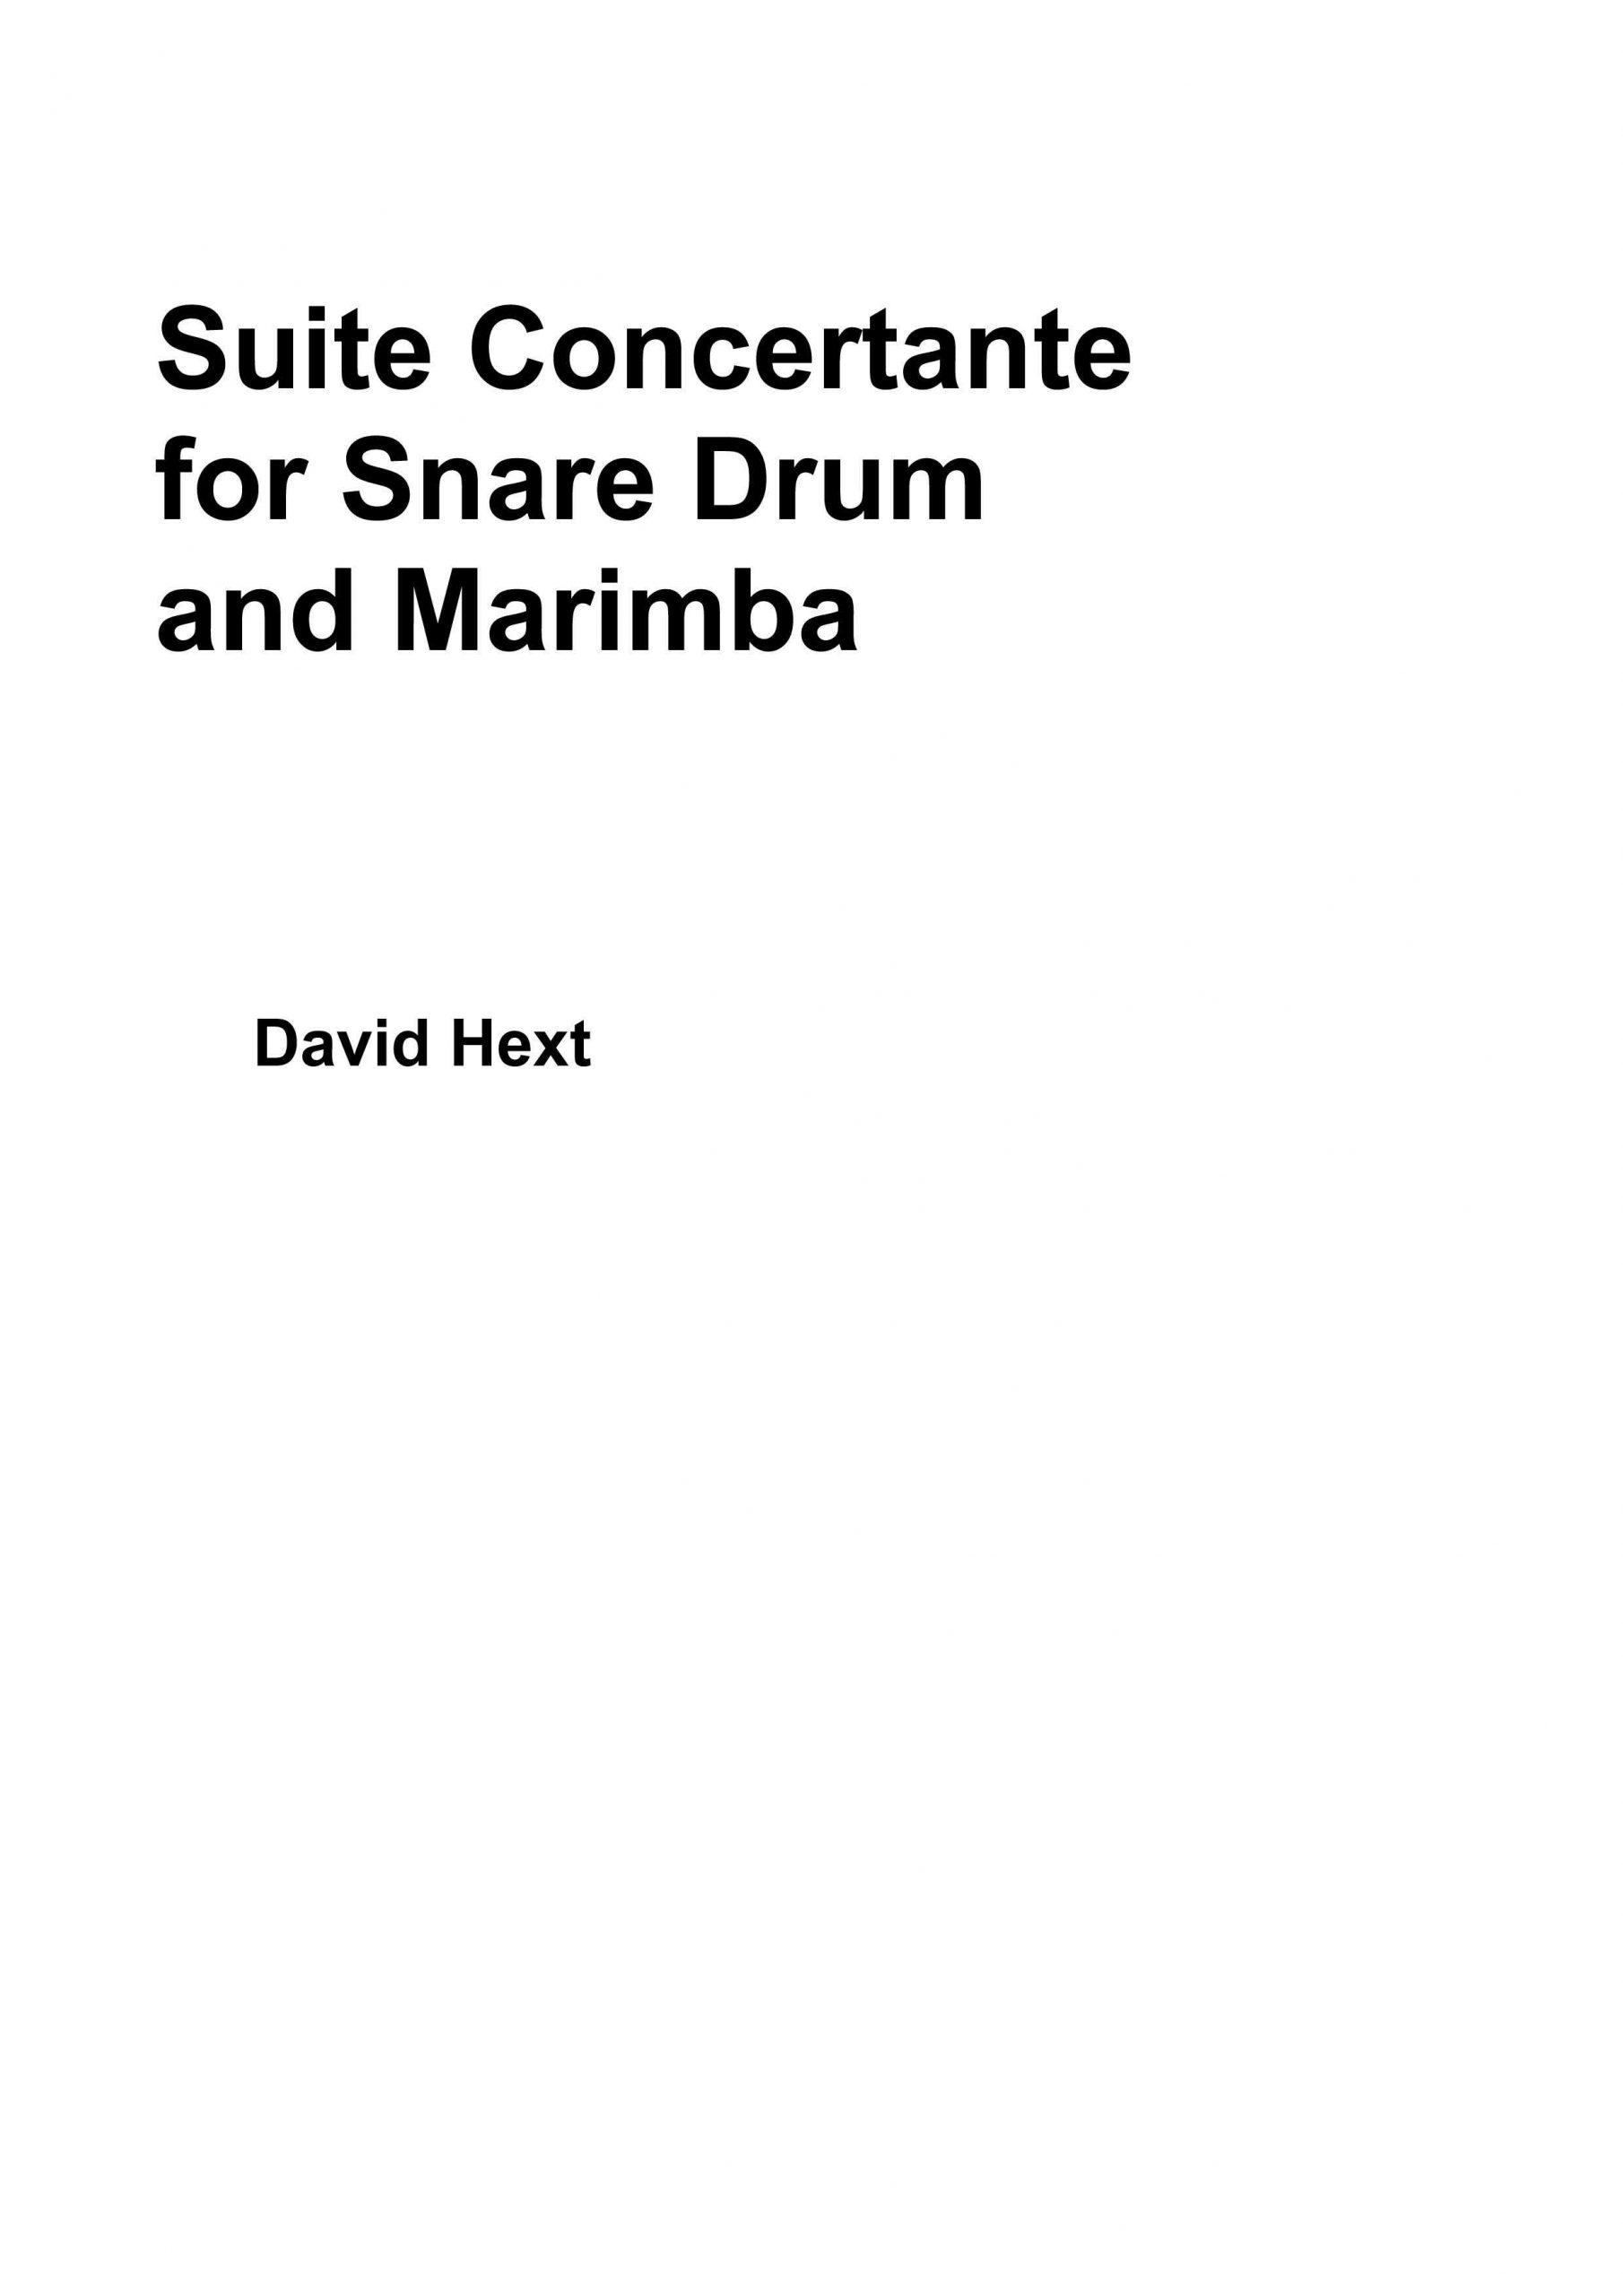 Suite Concertante for Snare Drum and Marimba by David Hext